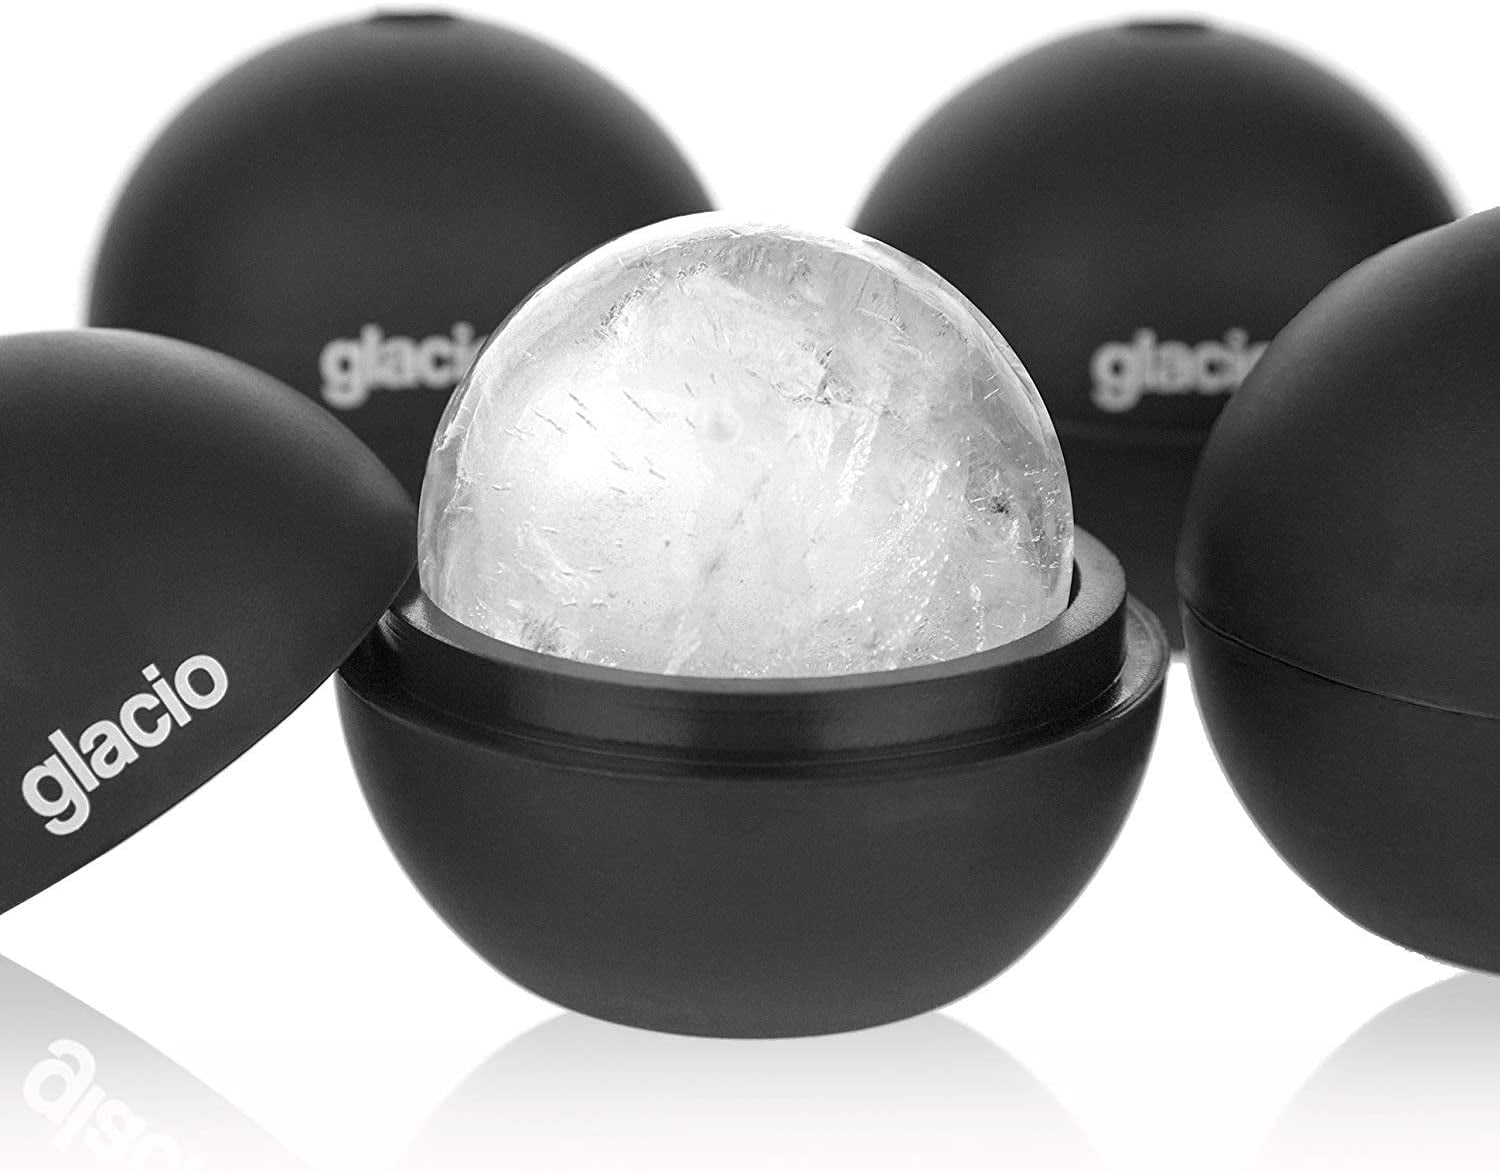 Glacio Ice Cube Molds Big Cubes & Large Sphere Ice Mold Set charcoal 